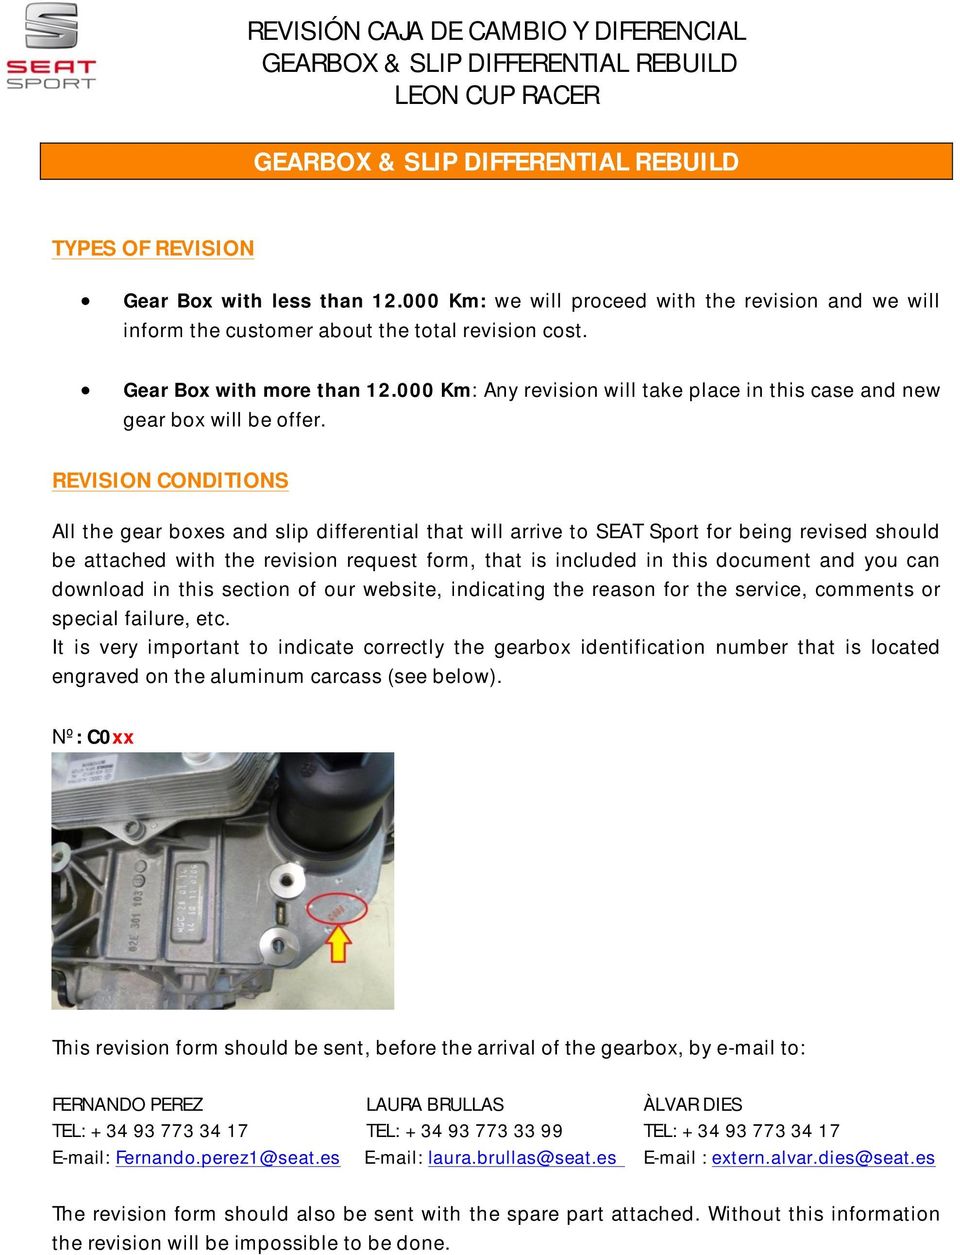 REVISION CONDITIONS All the gear boxes and slip differential that will arrive to SEAT Sport for being revised should be attached with the revision request form, that is included in this document and